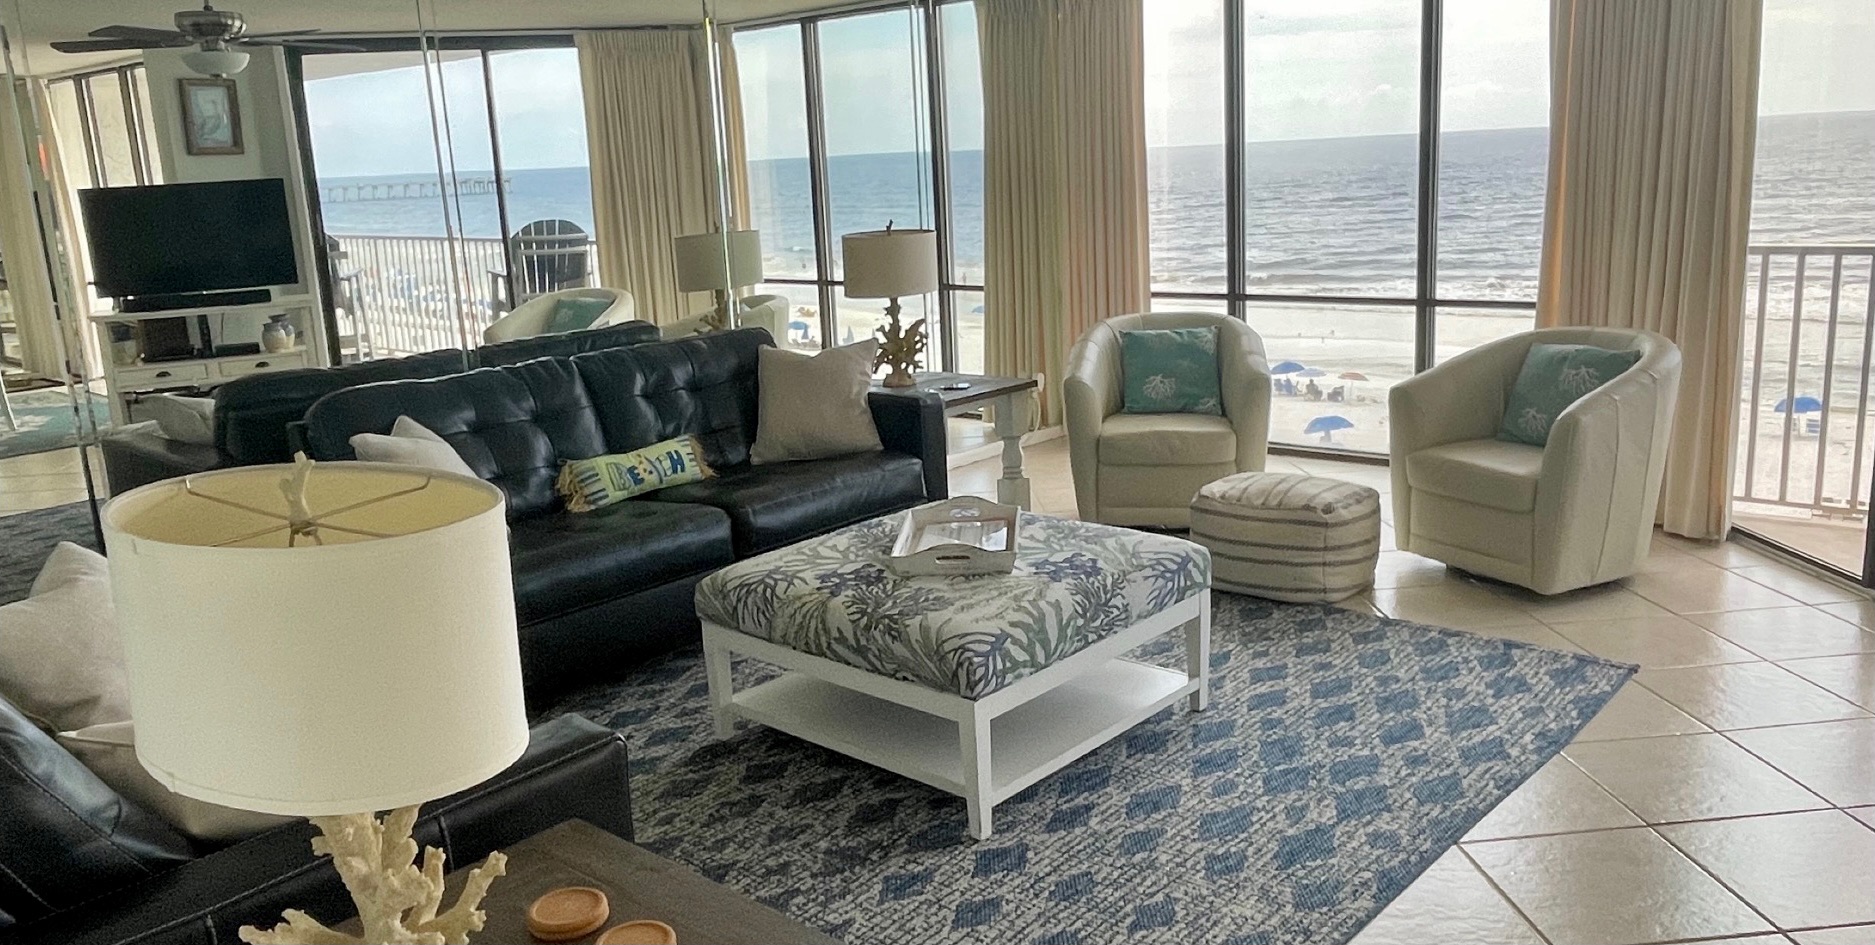 Edgewater Winward Deluxe 406 2 bdrm 2 ba for rent by private owner, Panama City Beach, FL.